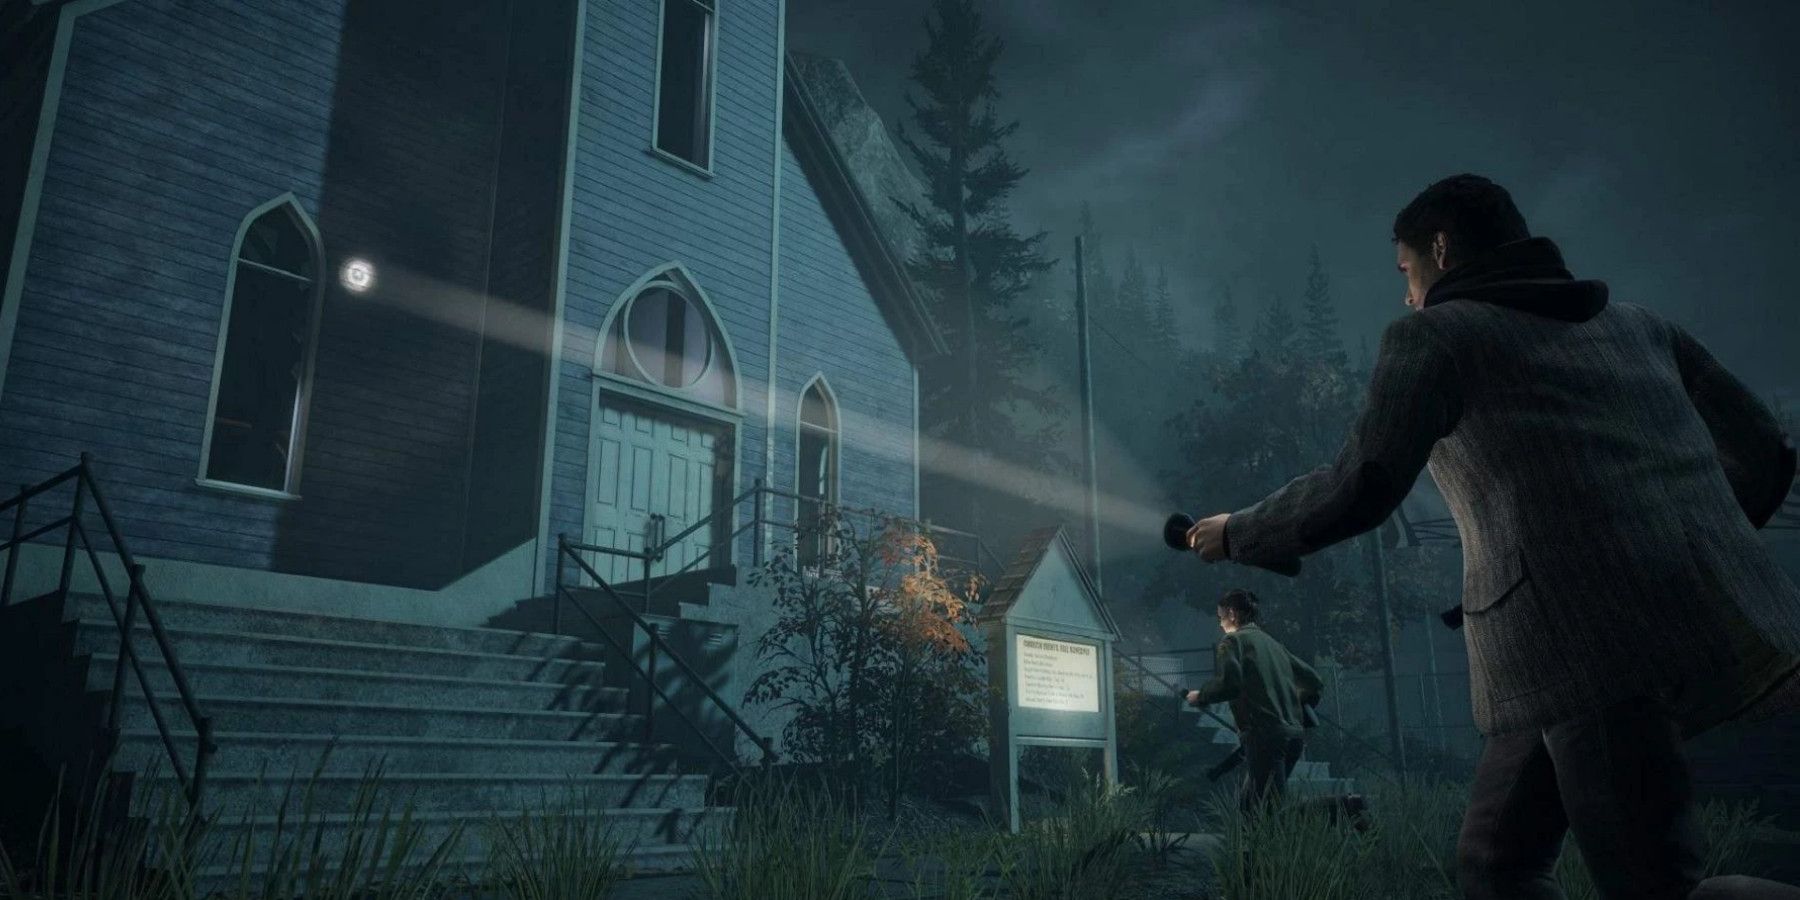 Alan-Wake-Remastered-Switch-Surprise-Release-Remedy-Entertainment-Epic-Games